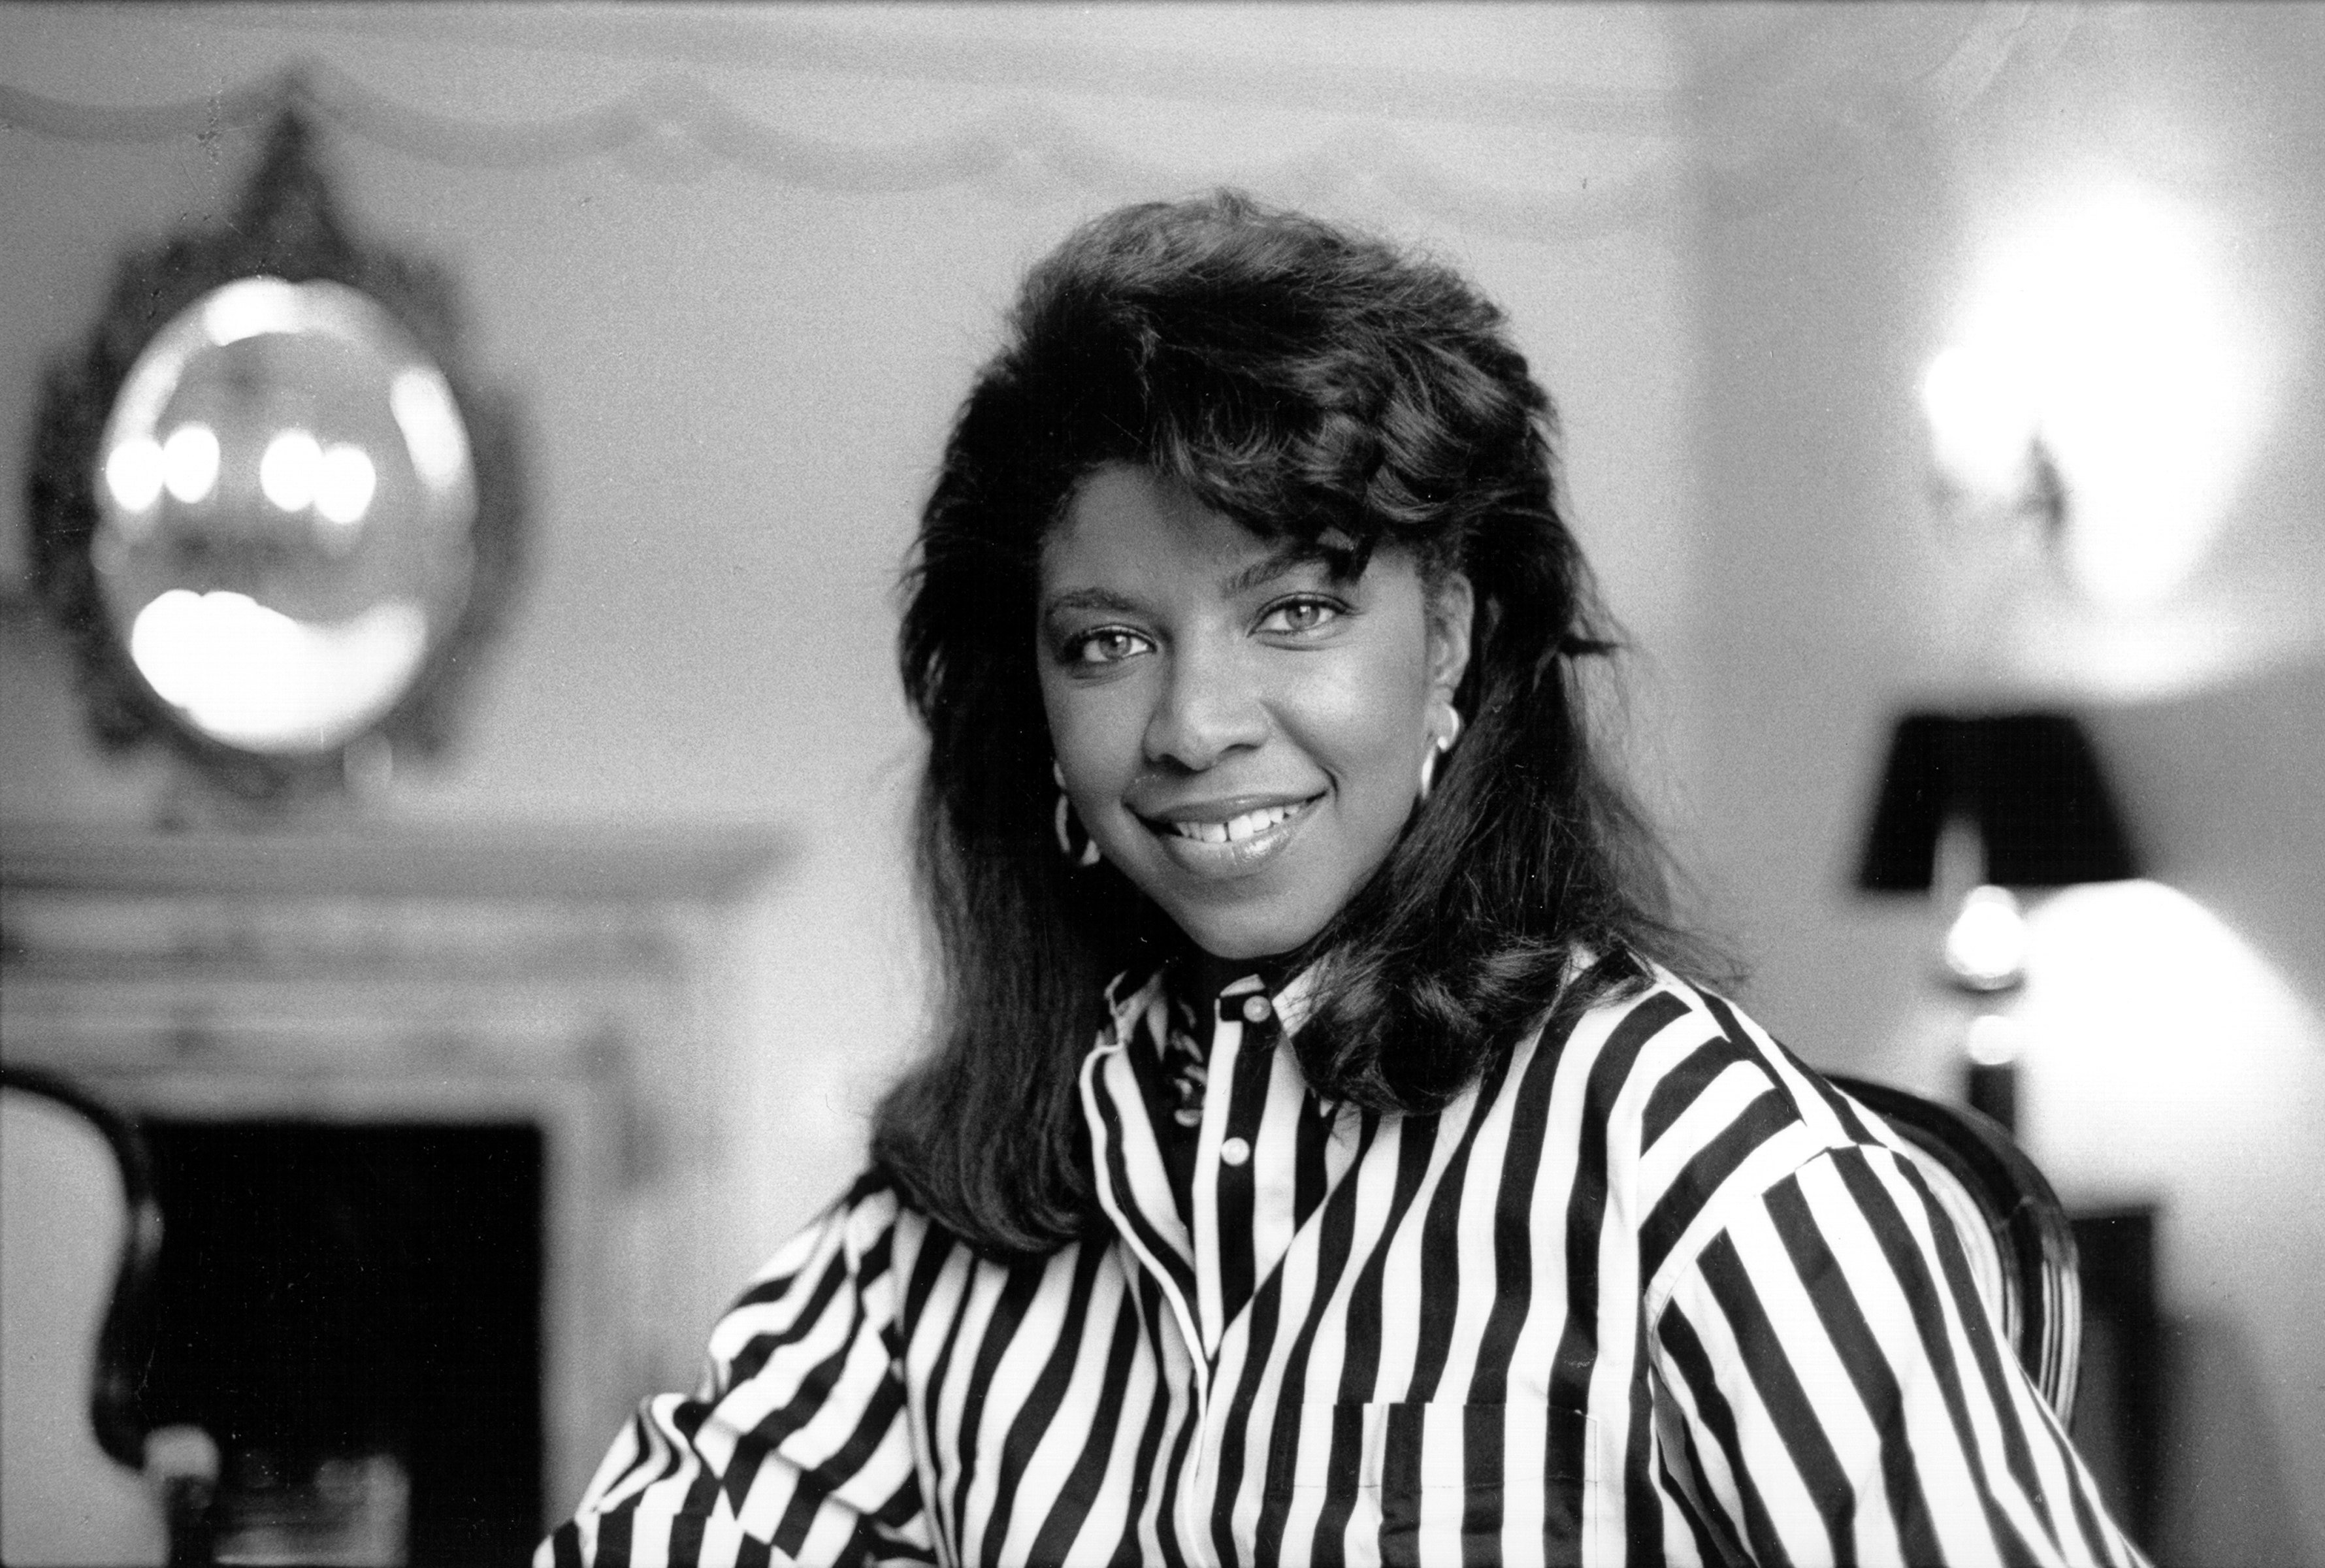 Natalie Cole at the Dorchester Hotel, London, UK on 6 August 1987 | Source: Getty Images